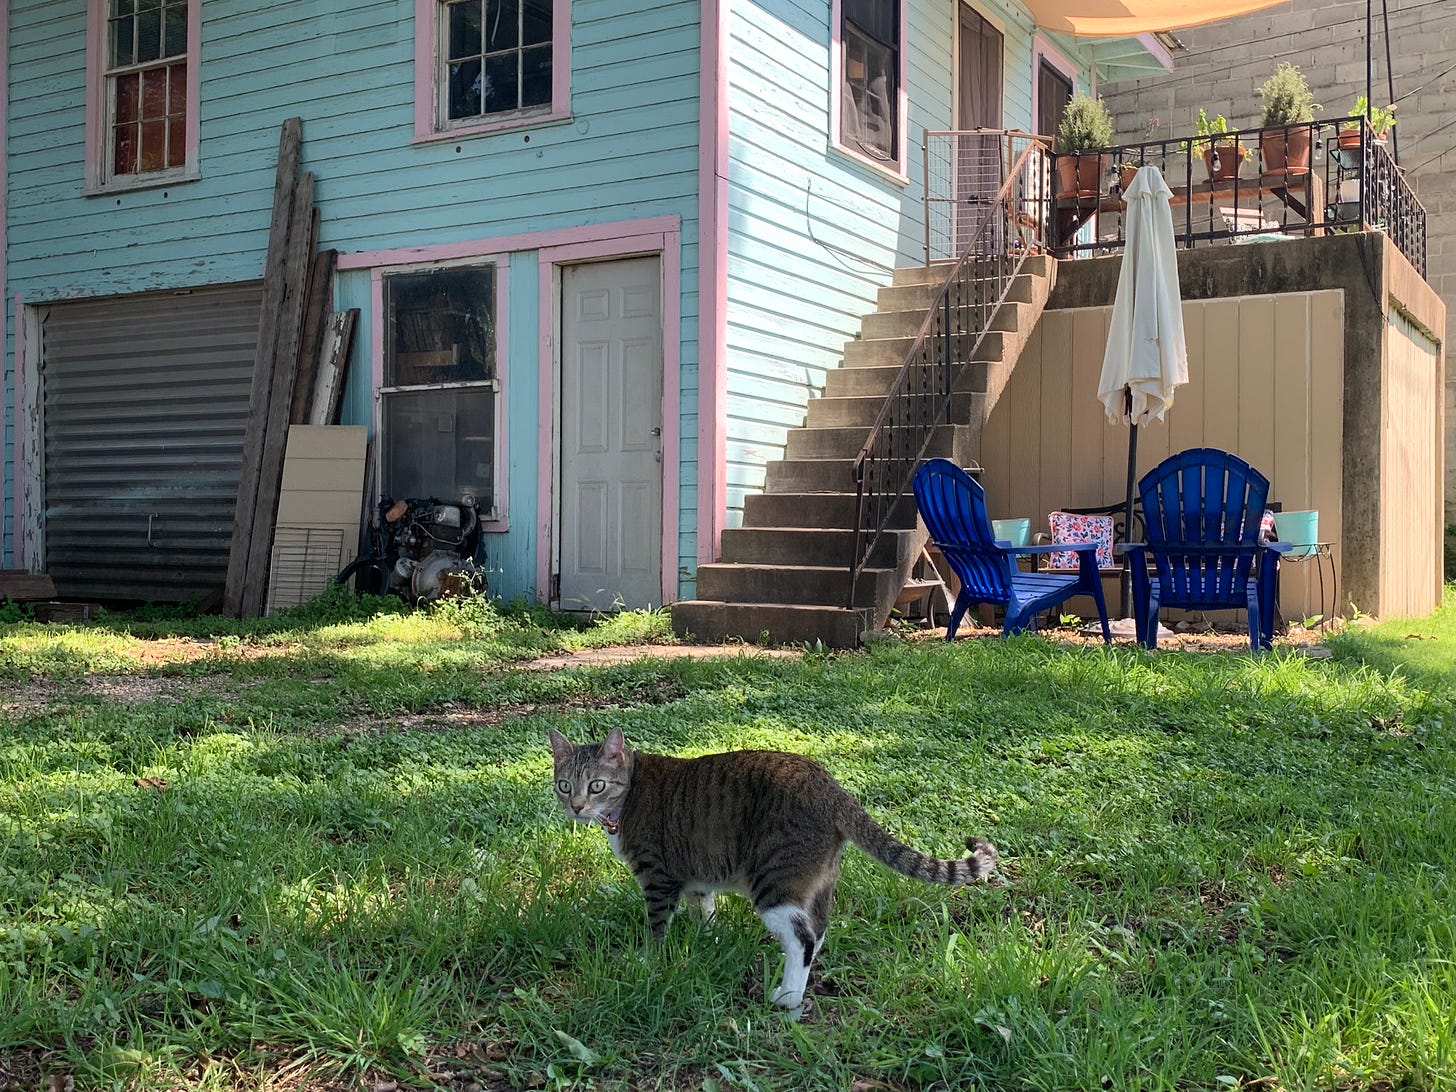 A tabby cat stands on a lawn outside a turquoise home with pink finishings